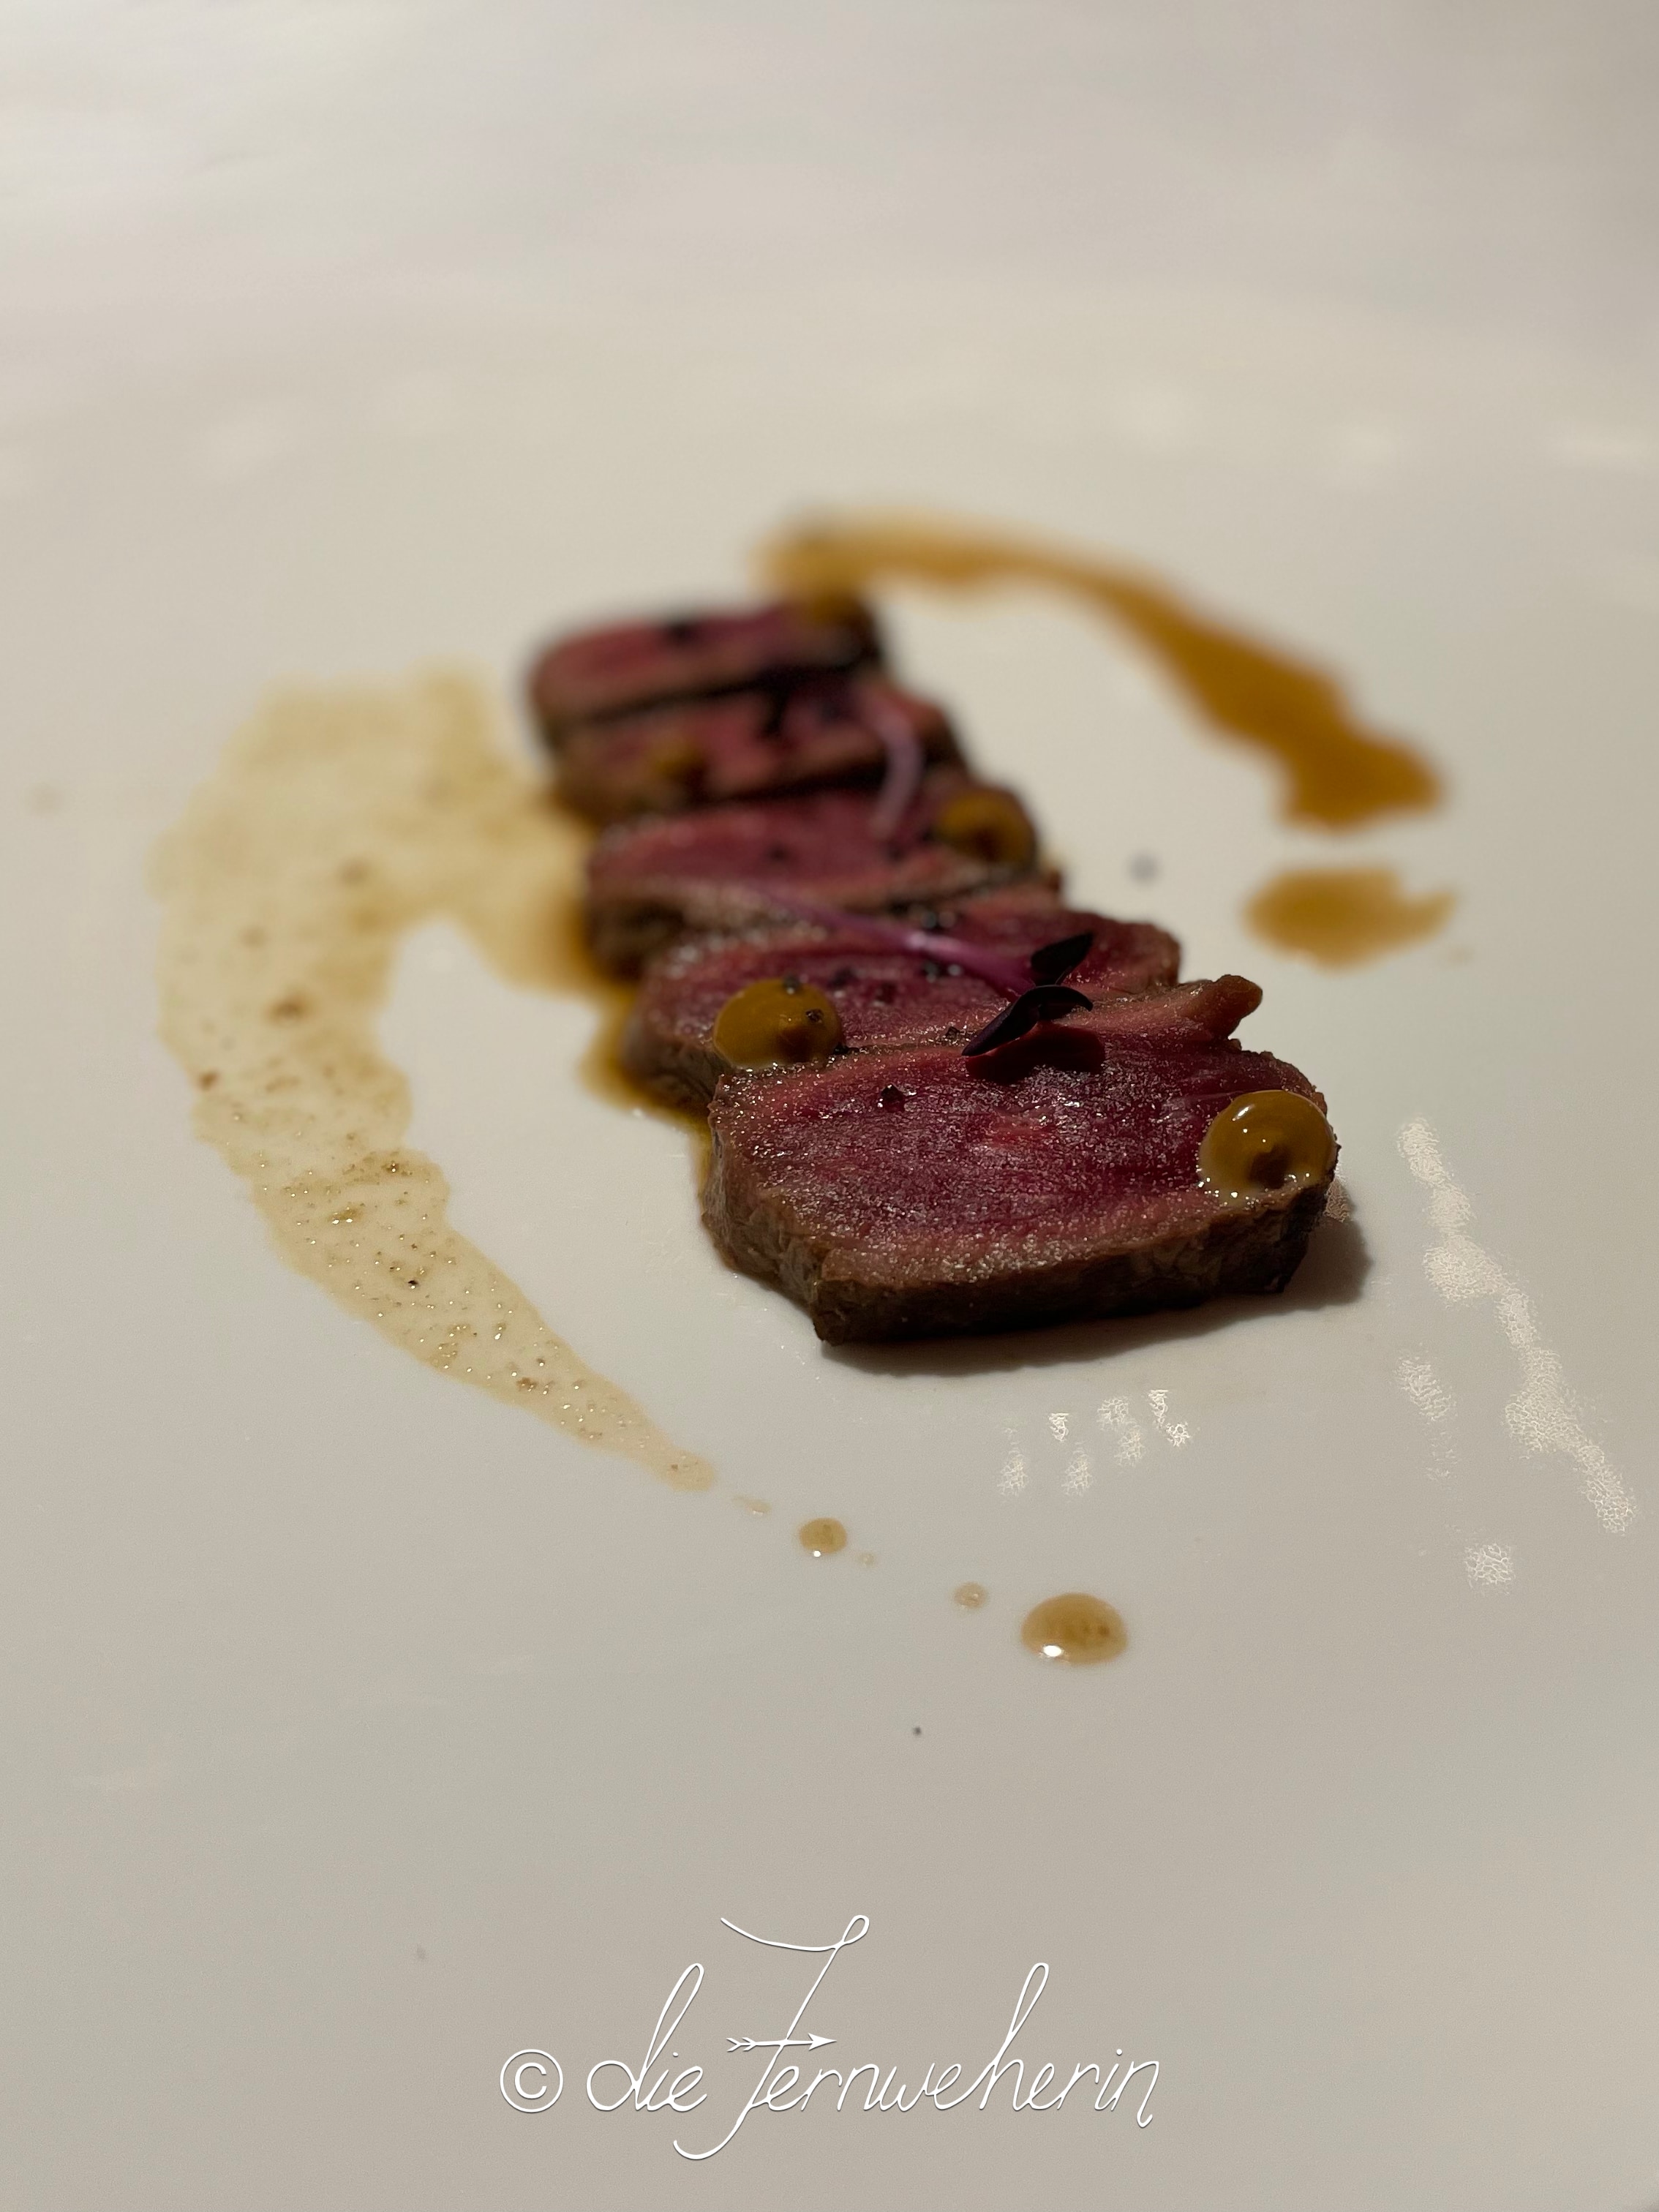 The smoked & shoyu-marinated Bison Tataki at the Post Hotel Dining Room.